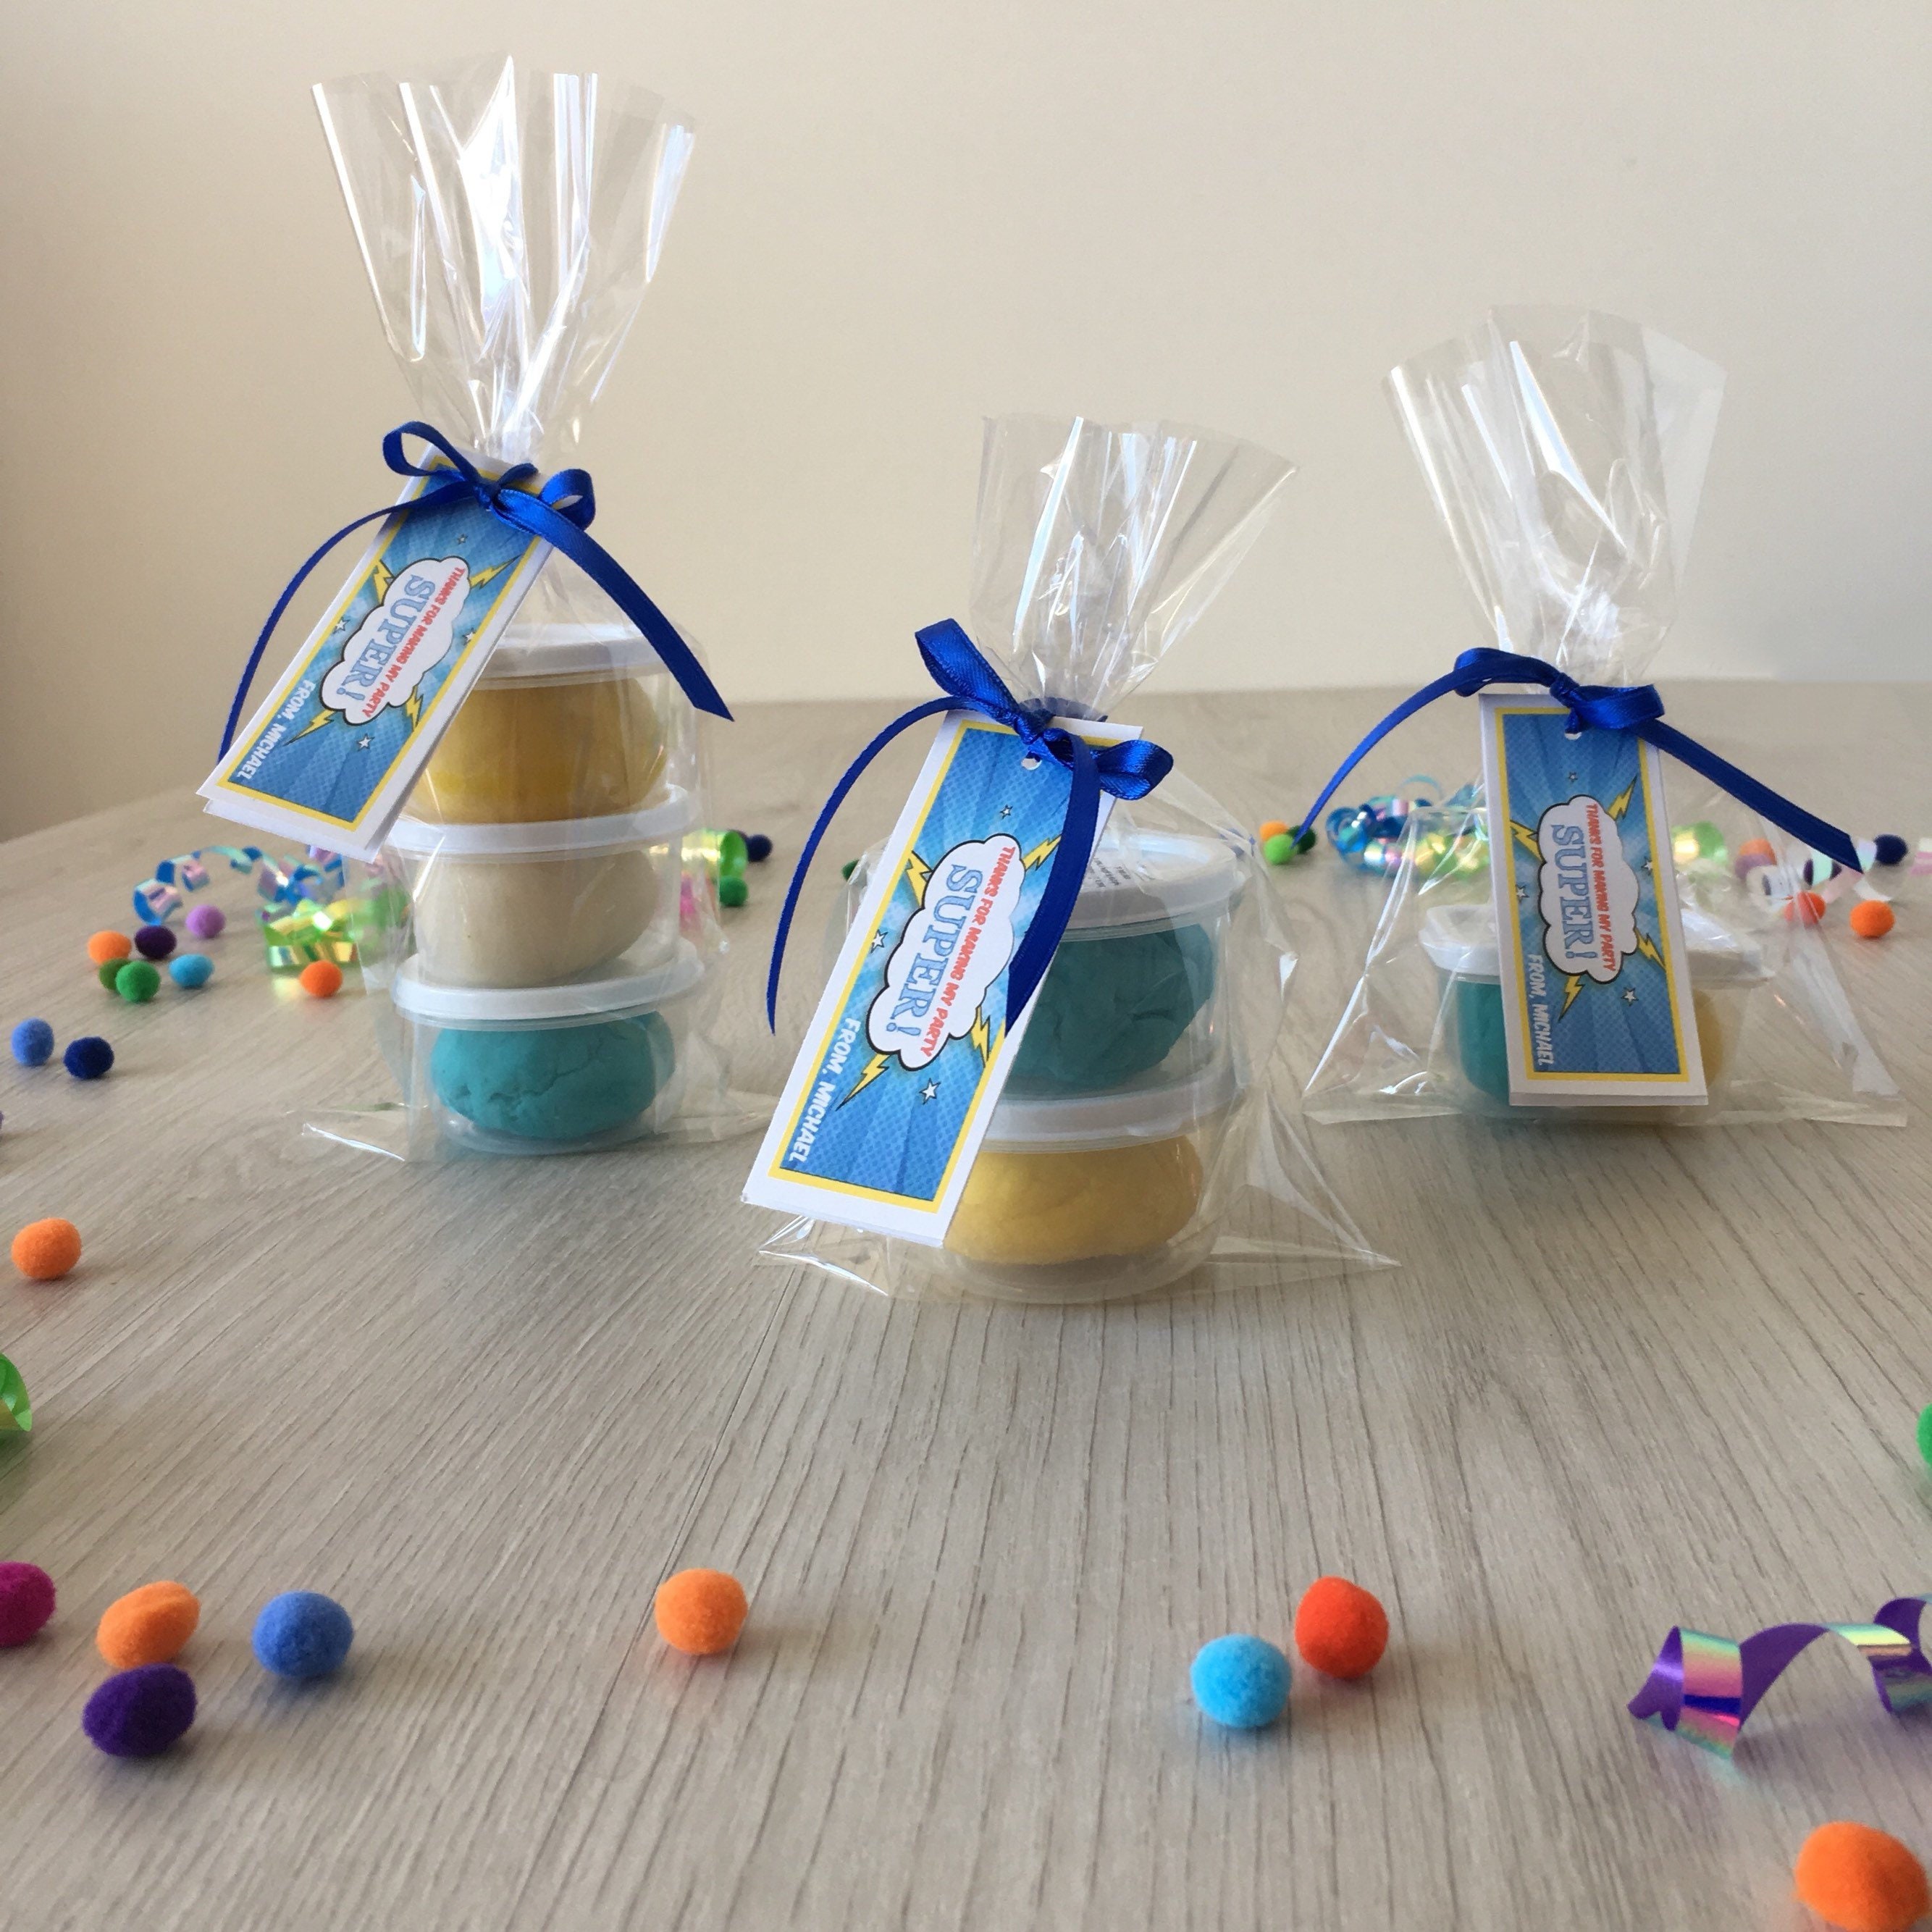 Letter & Star Crayon Party Favours - includes 1 letter crayon and 2 stars -  customizable with childs name